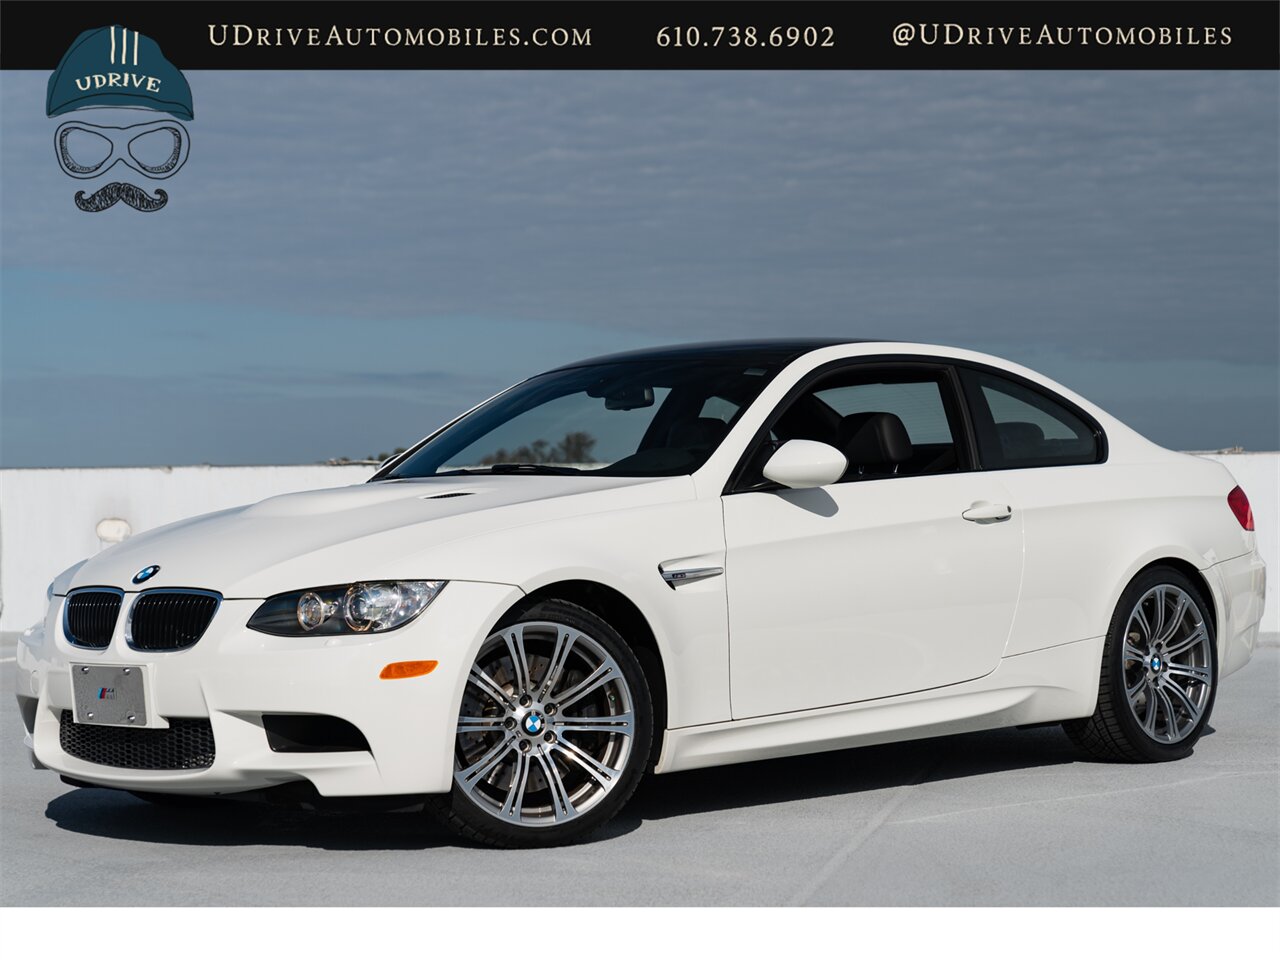 2011 BMW M3  No Nav Carbon Roof Comf Acc 19in Whls 11k Miles - Photo 1 - West Chester, PA 19382